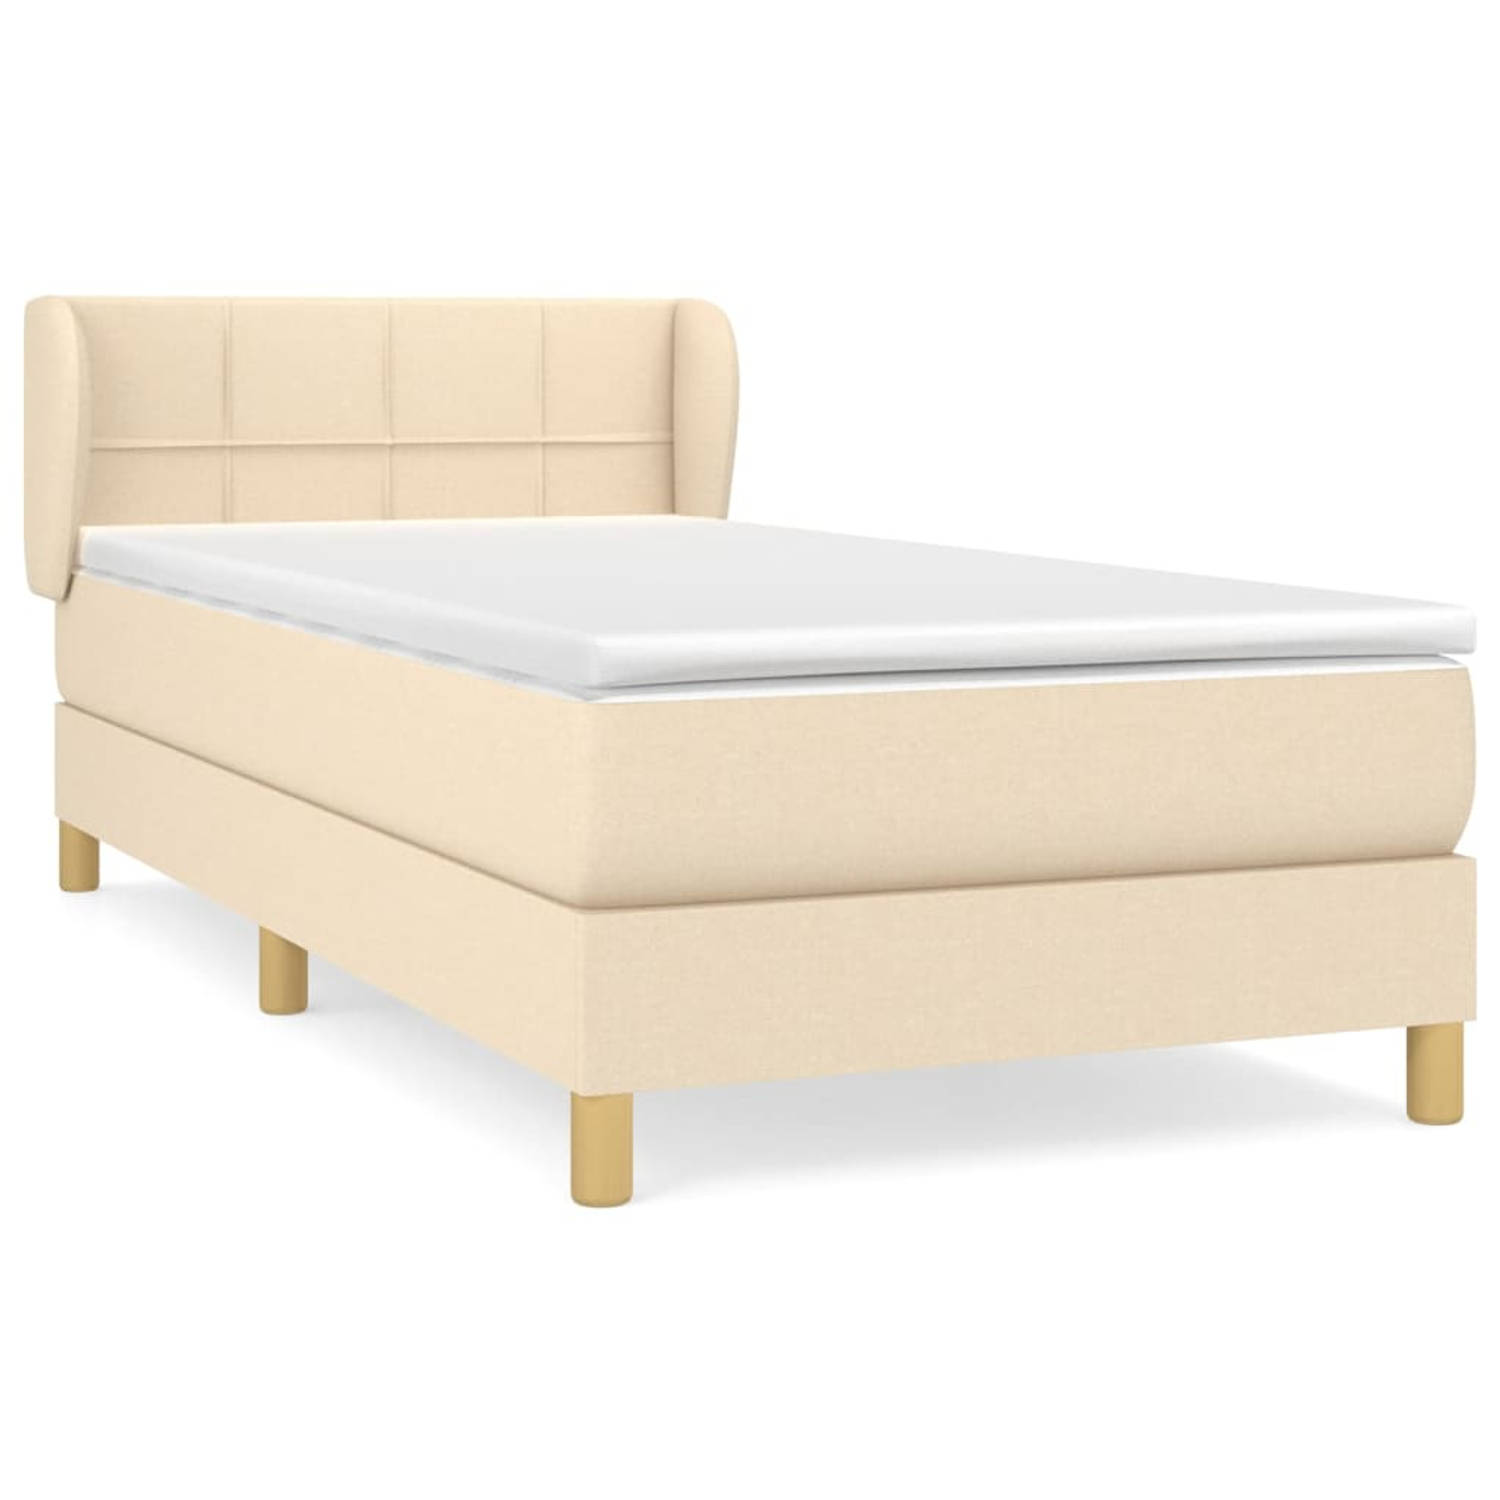 The Living Store Boxspringbed - Bed - 203x93x78/88cm - Crème